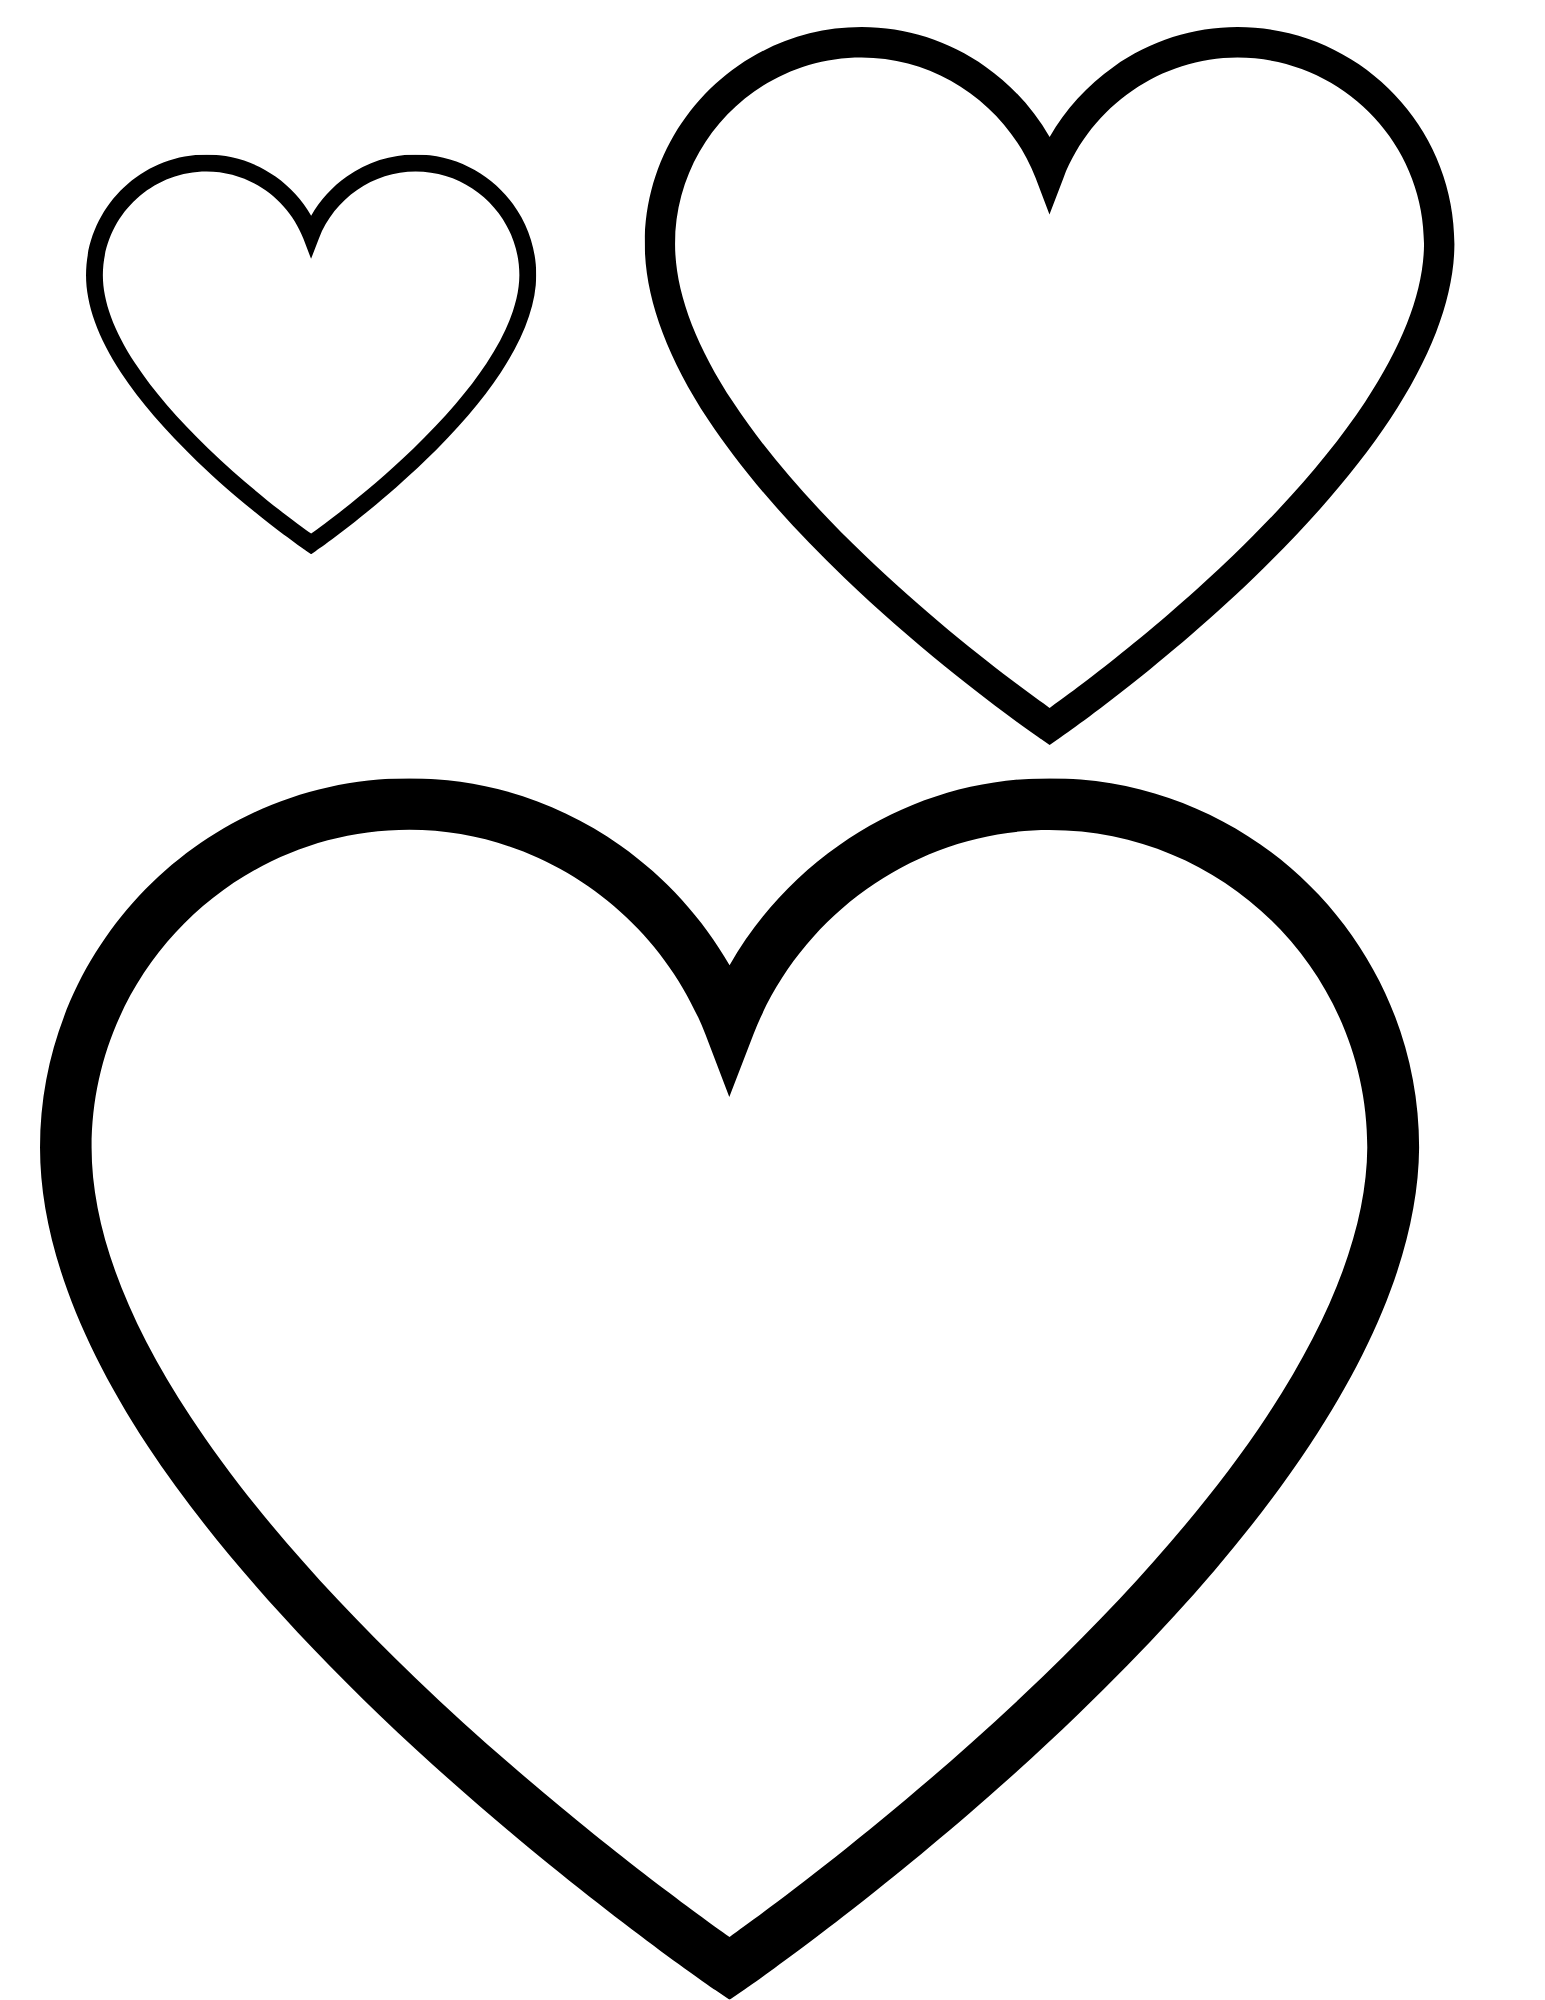 free heart shape coloring pages